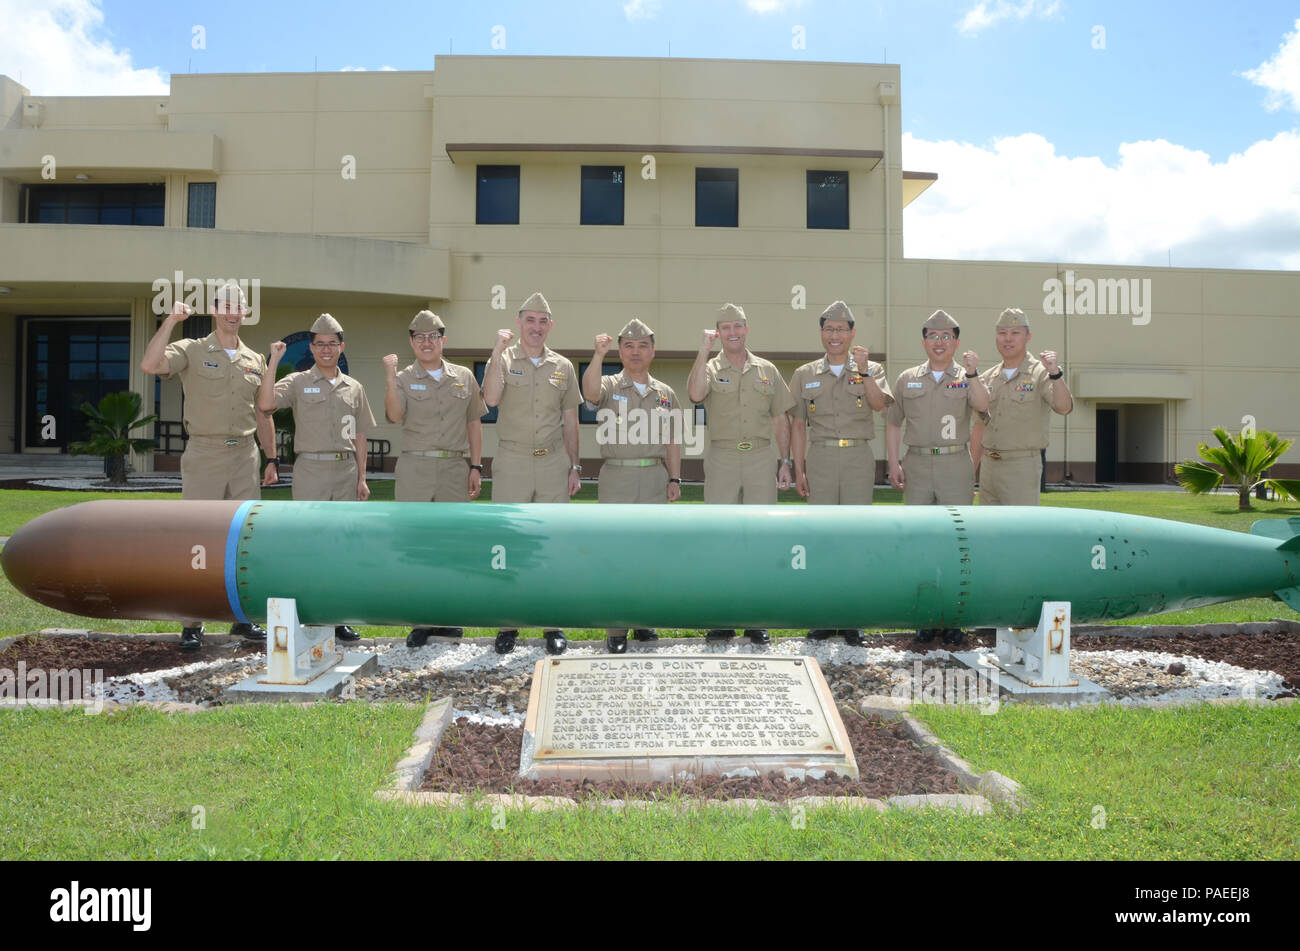 160331-N-YM720-294 SANTA RITA, Guam (March 31, 2016) Members of the U.S. and Republic of Korea (ROK) submarine forces pose outside Submarine Squadron (SUBRON) 15 at Polaris Point, Naval Base Guam, to celebrate the conclusion of the 43rd Submarine Warfare Committee Meeting (SWCM). SWCM is a bilateral discussion between the U.S. and ROKN submarine forces designed to foster the partnership and focuses on submarine tactics, force integraton and future submarine development. (U.S. Navy photo by MC3 Allen McNair/Released) Stock Photo